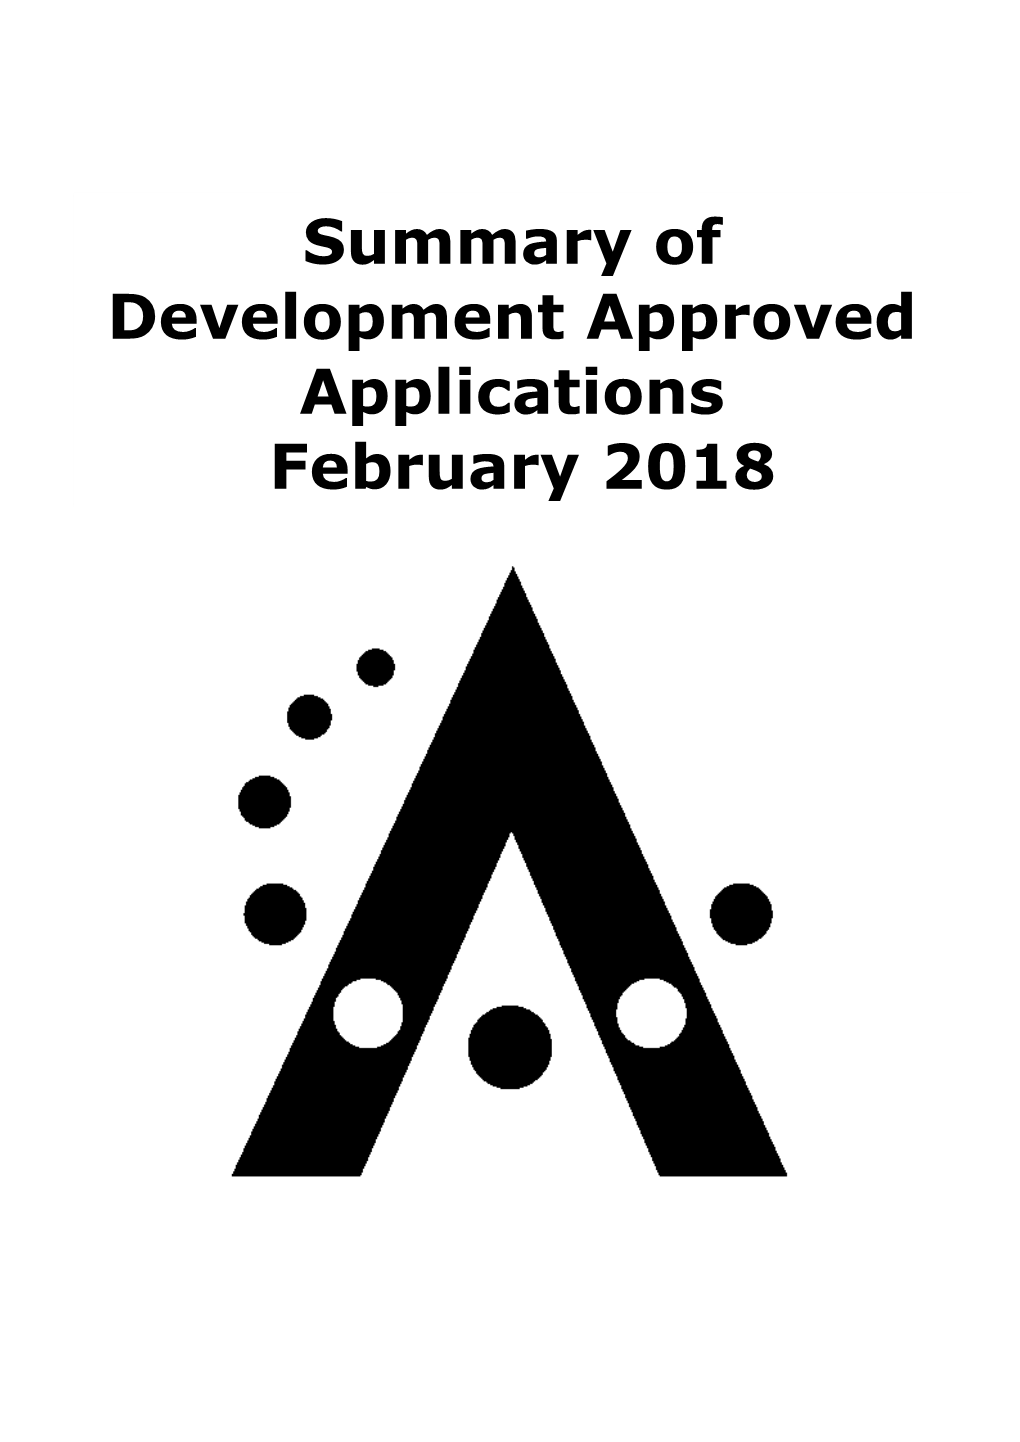 Summary of Development Approved Applications February 2018 Summary of Development Approved Applications February 2018